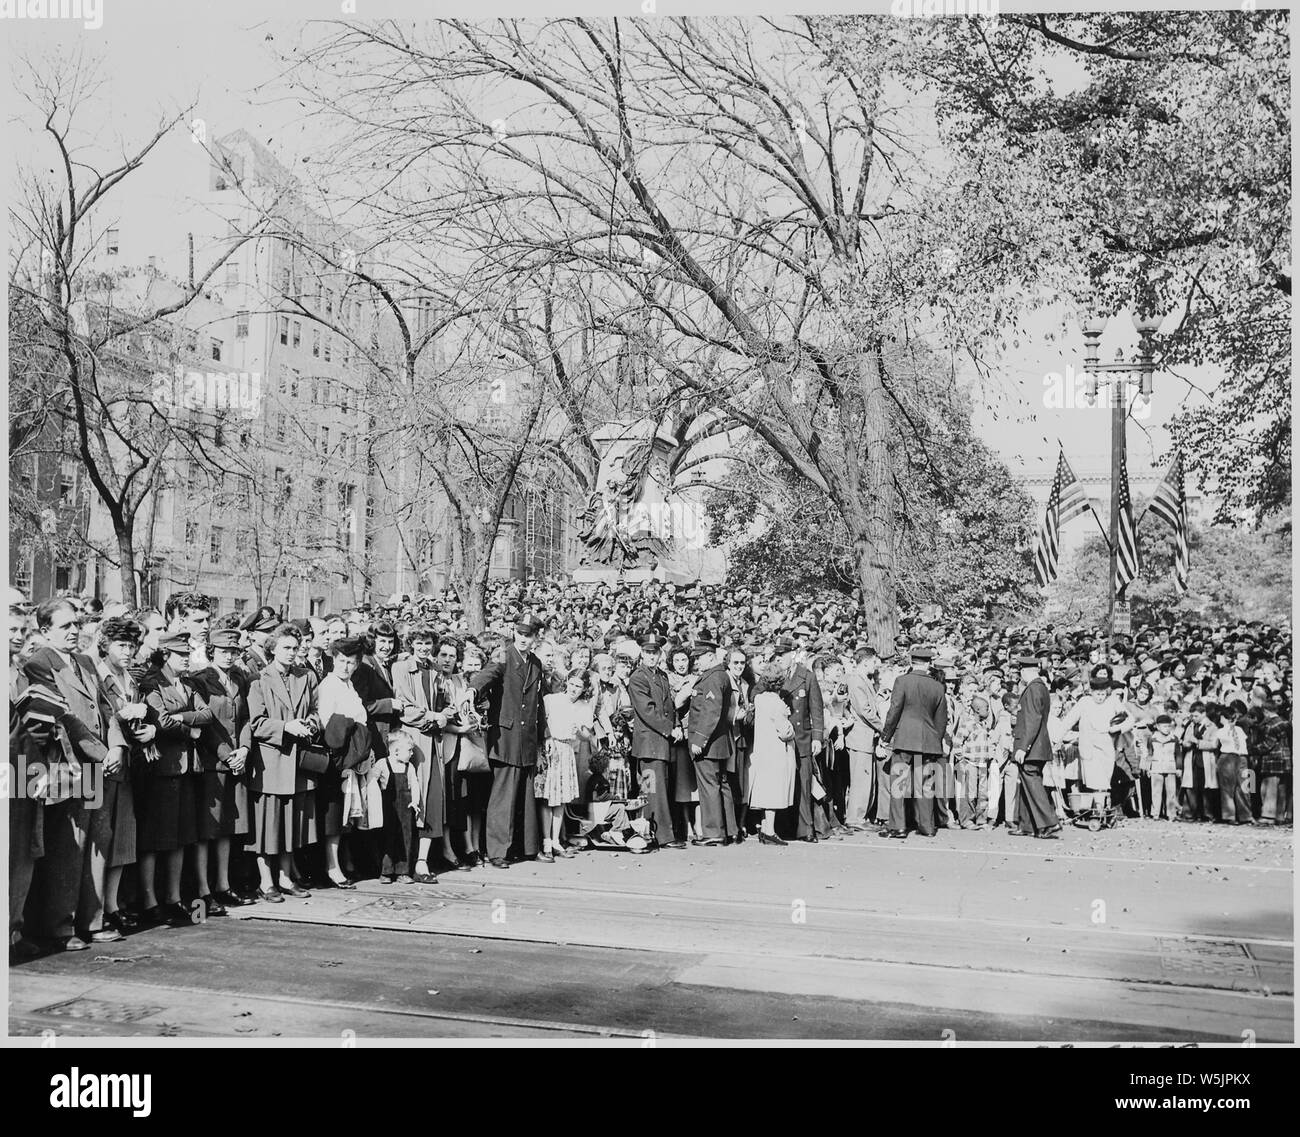 A crowd gathered in Jackson Park, across the street from the front of the White House, waiting to see President Harry S. Truman and Vice President-elect Alben W. Barkley, who had just returned to Washington, DC after their victory in the 1948 election. Stock Photo